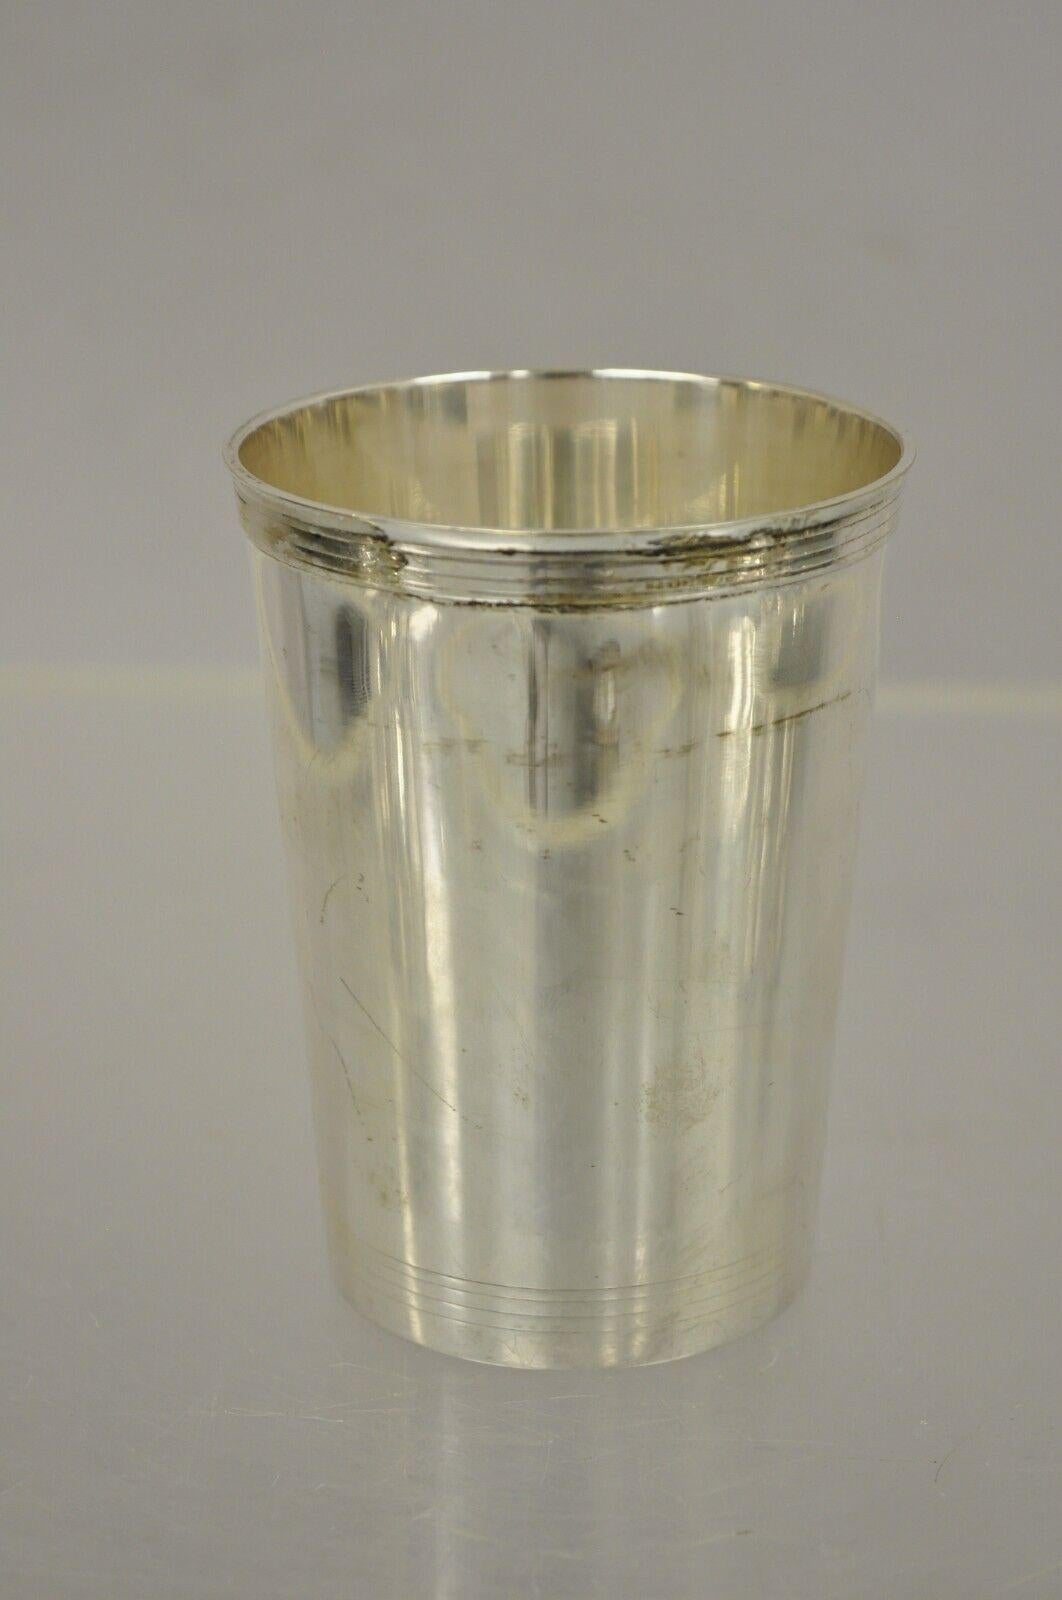 Vintage Leonard EPNS silver plate mint Julep cup 818 Modern - Set of 12. Item features (12) cups, nice weight, original label, very nice vintage set, clean modernist lines, quality craftsmanship. mid to late 20th century. Measurements: 4